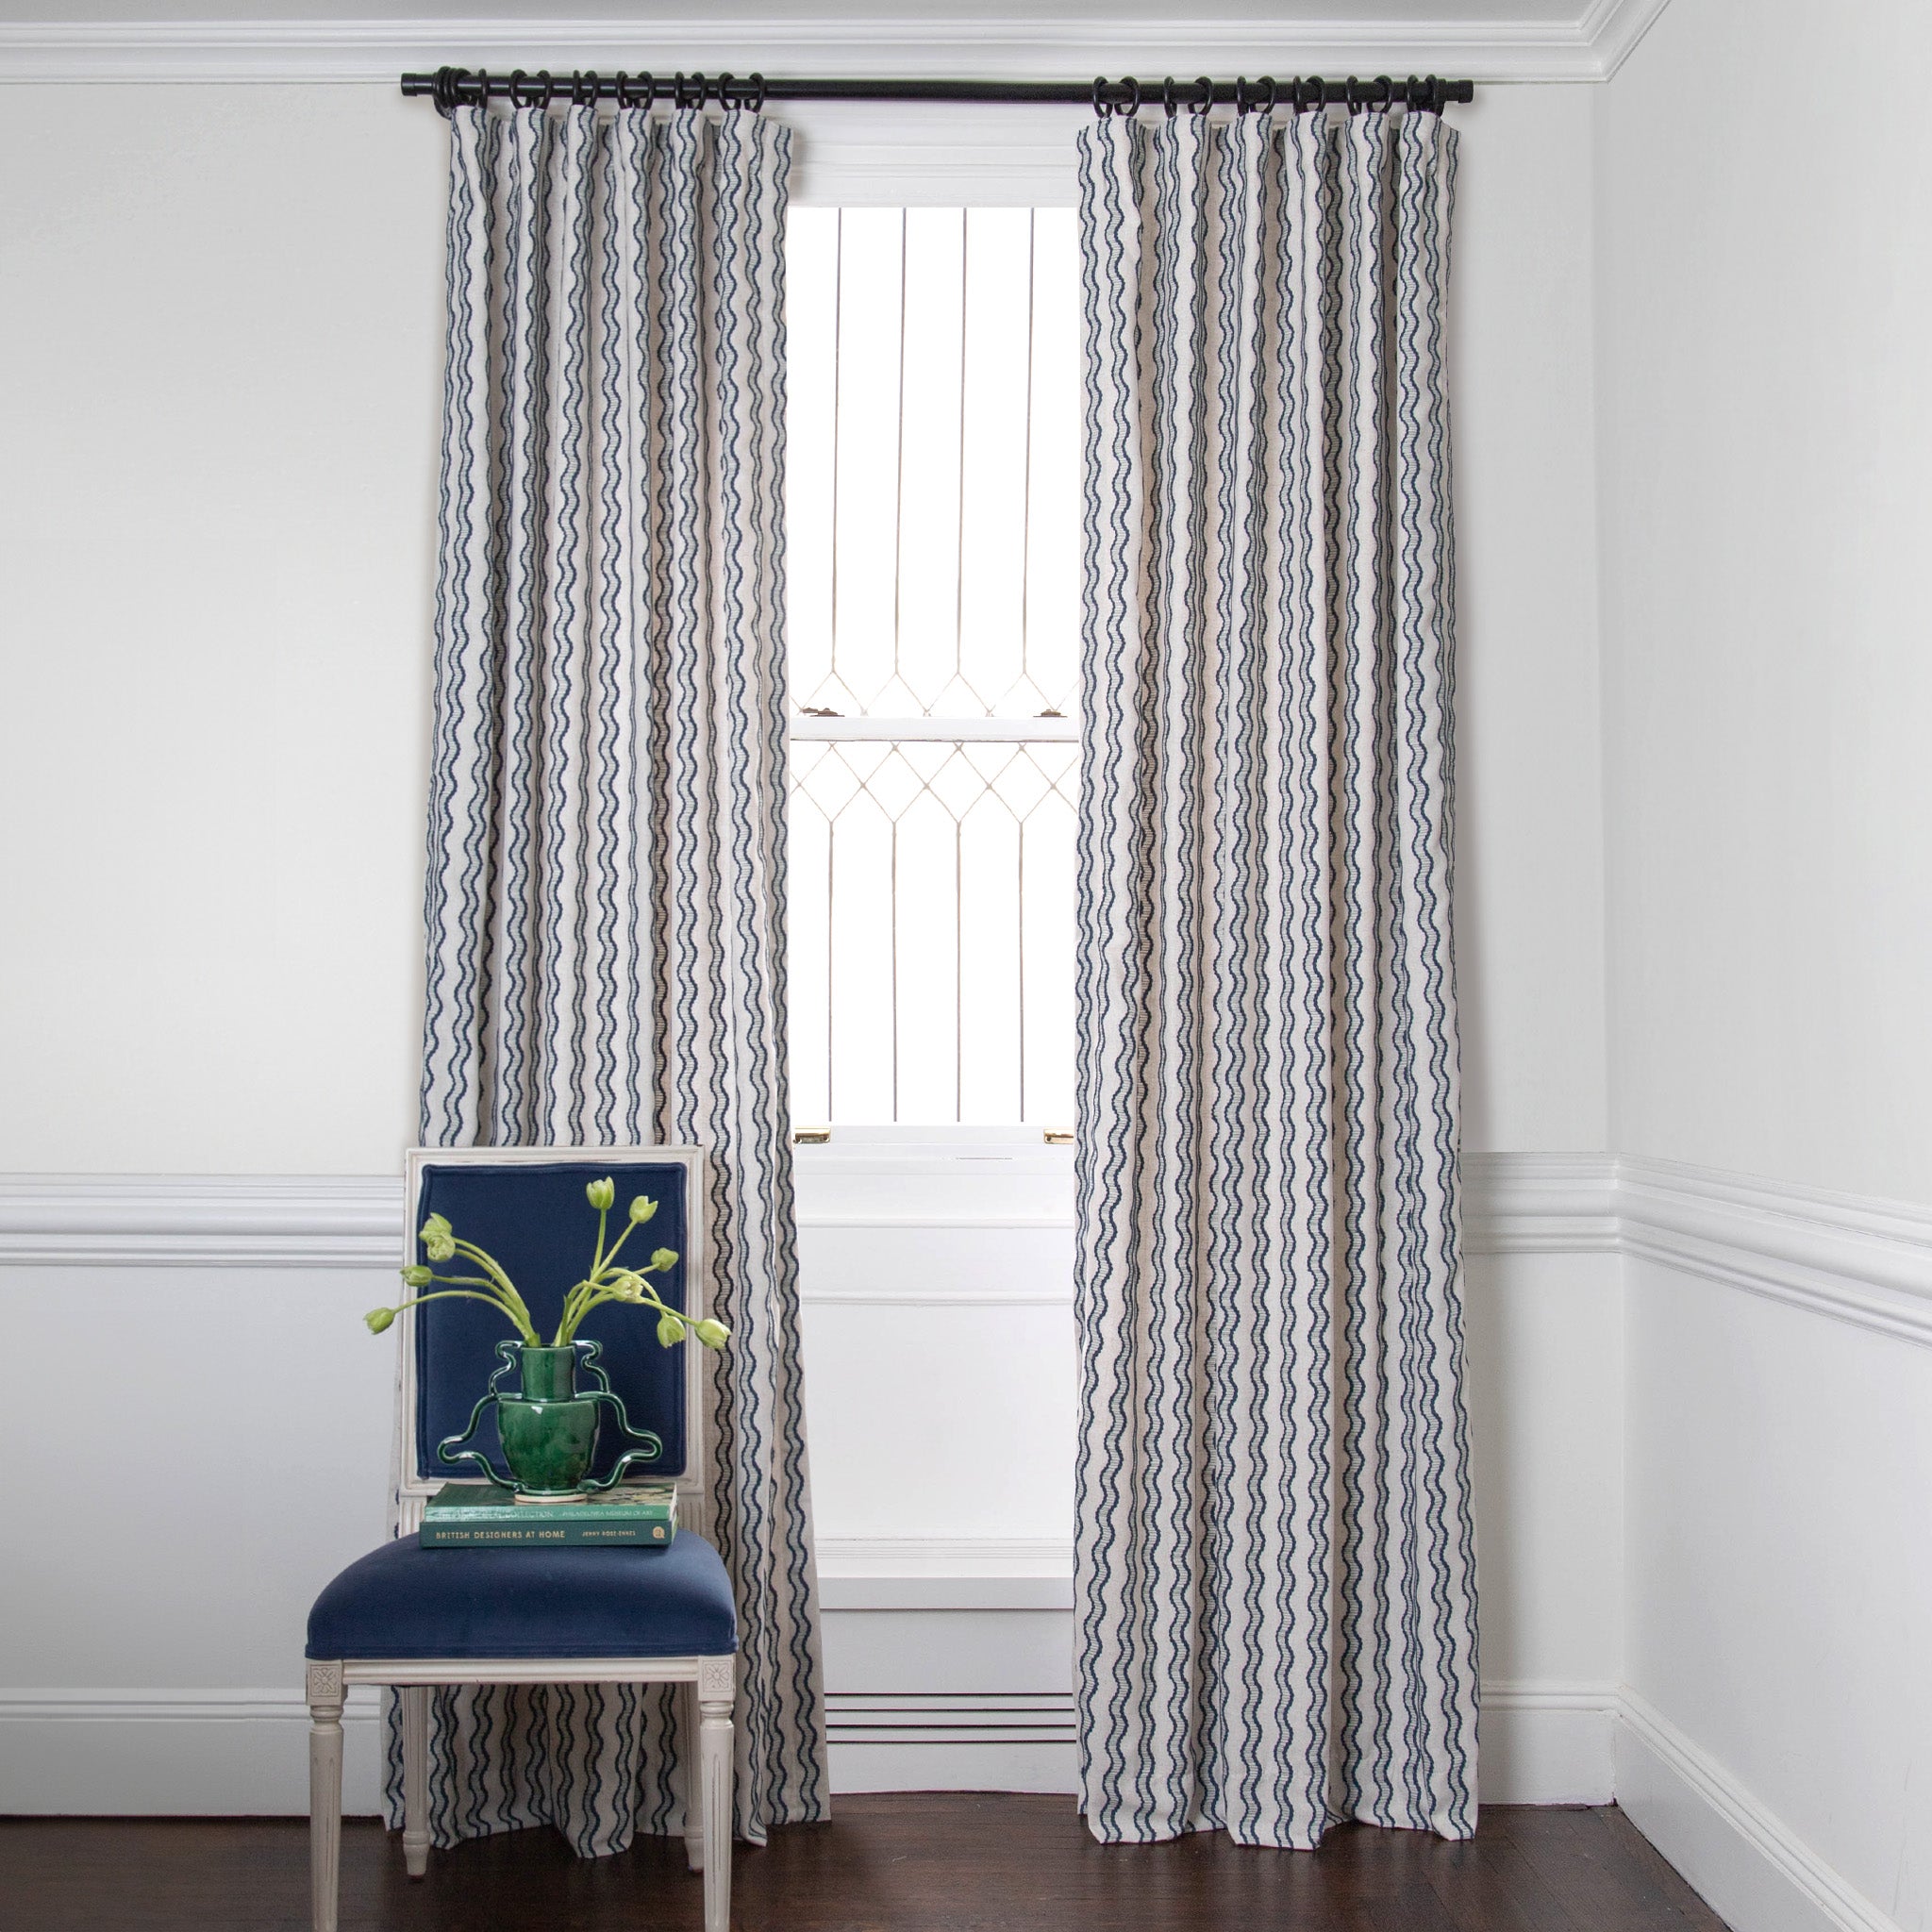 embroidered cream curtains with navy blue wavy lines on a metal rod in front of an illuminated window with a blue chair stacked with books 